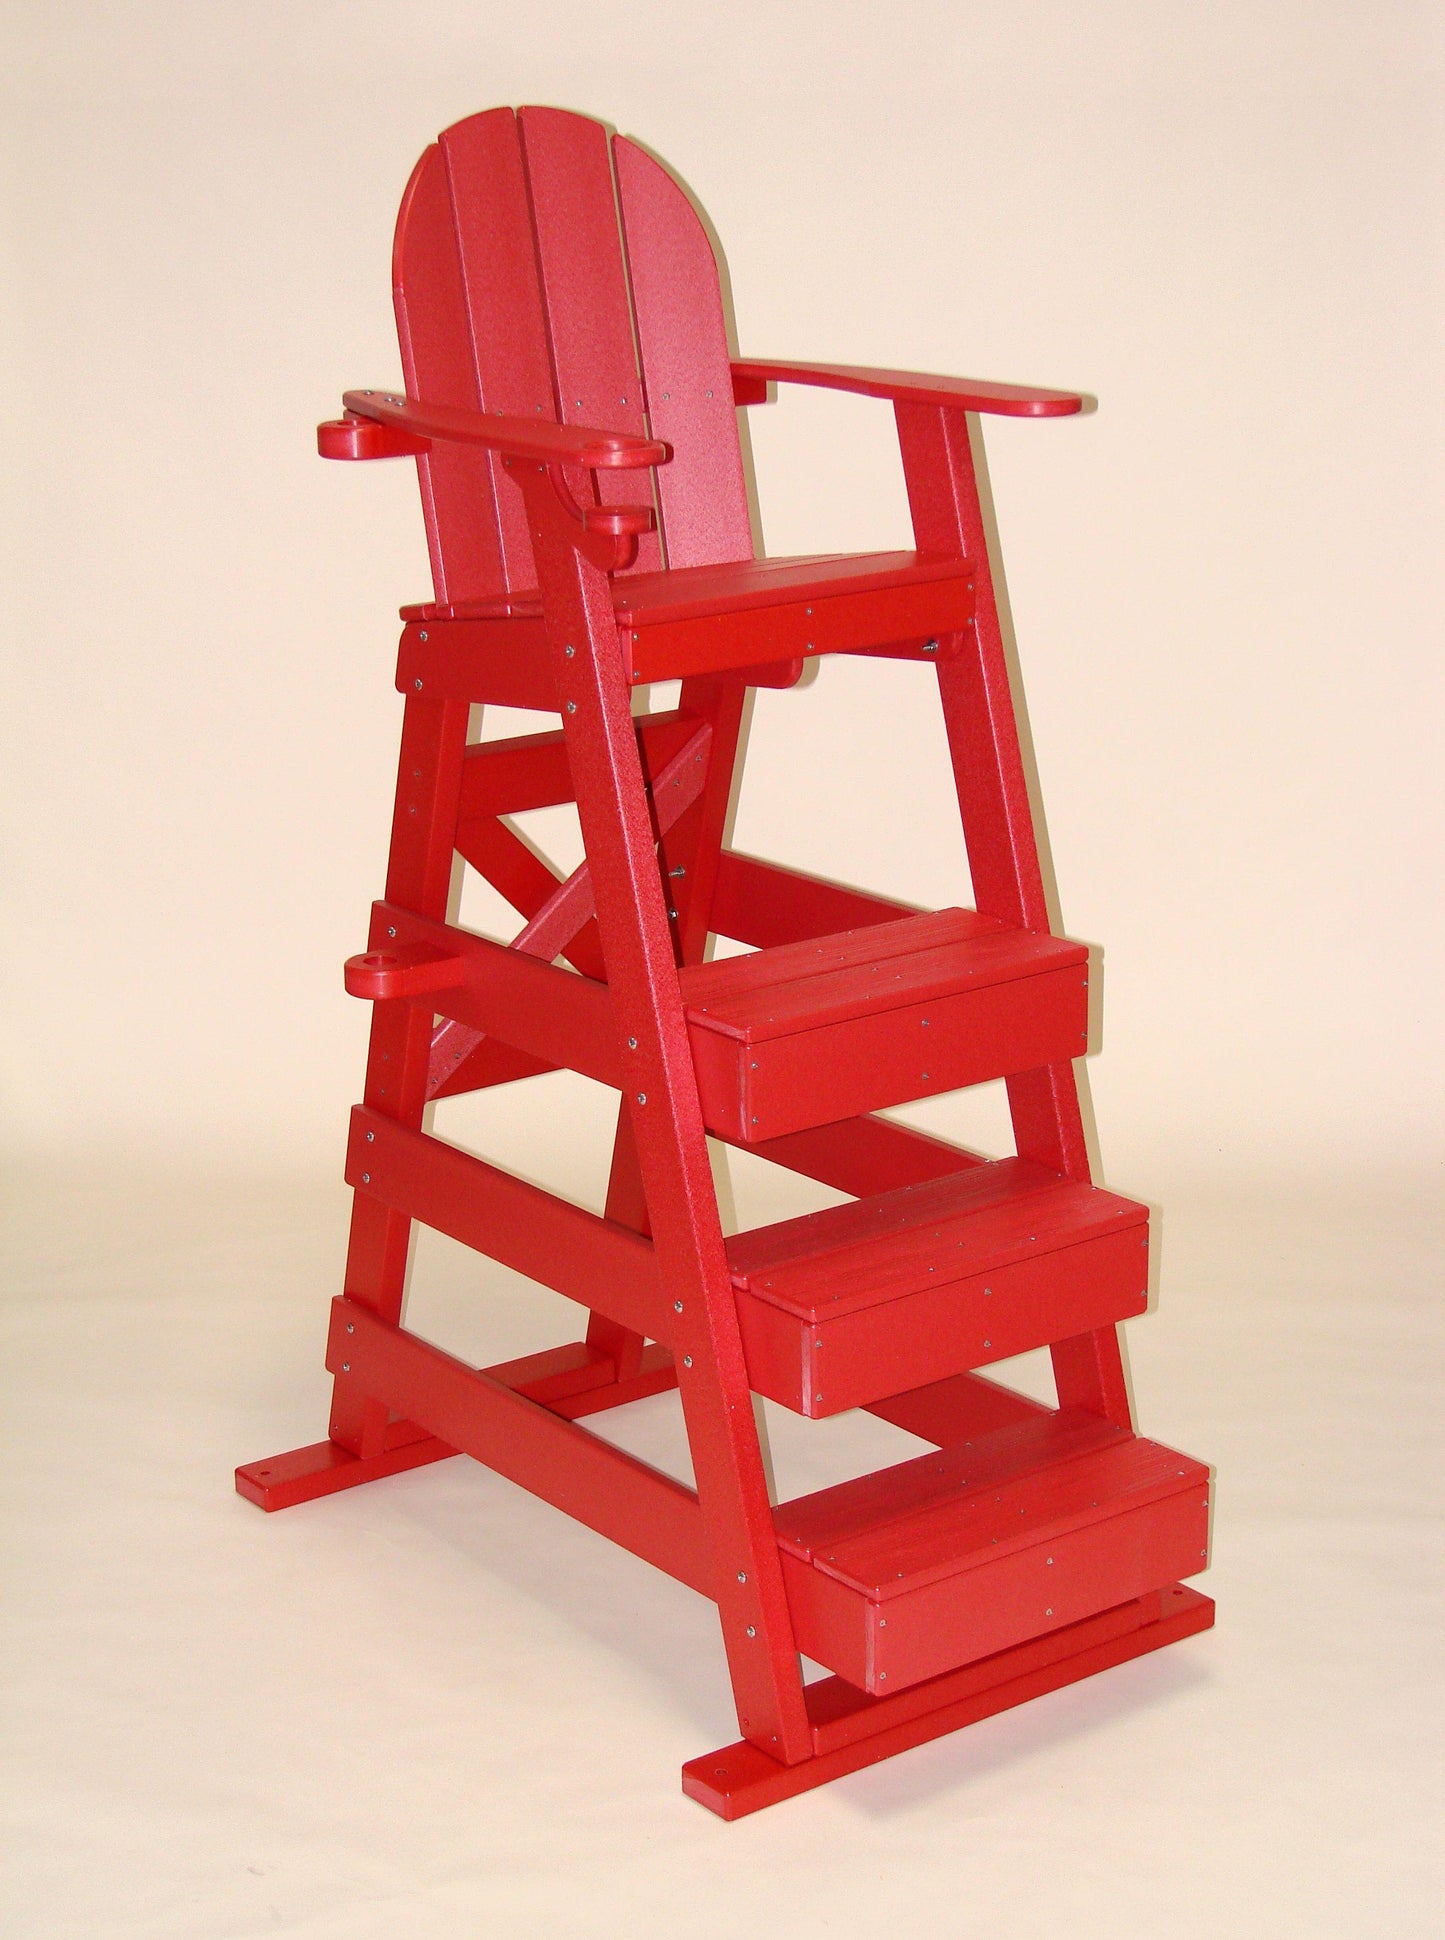 Tailwind Furniture Recycled Plastic Lifeguard Chair - LG-515 - Seat Height 50" - LEAD TIME TO SHIP 10 TO 12 BUSINESS DAYS